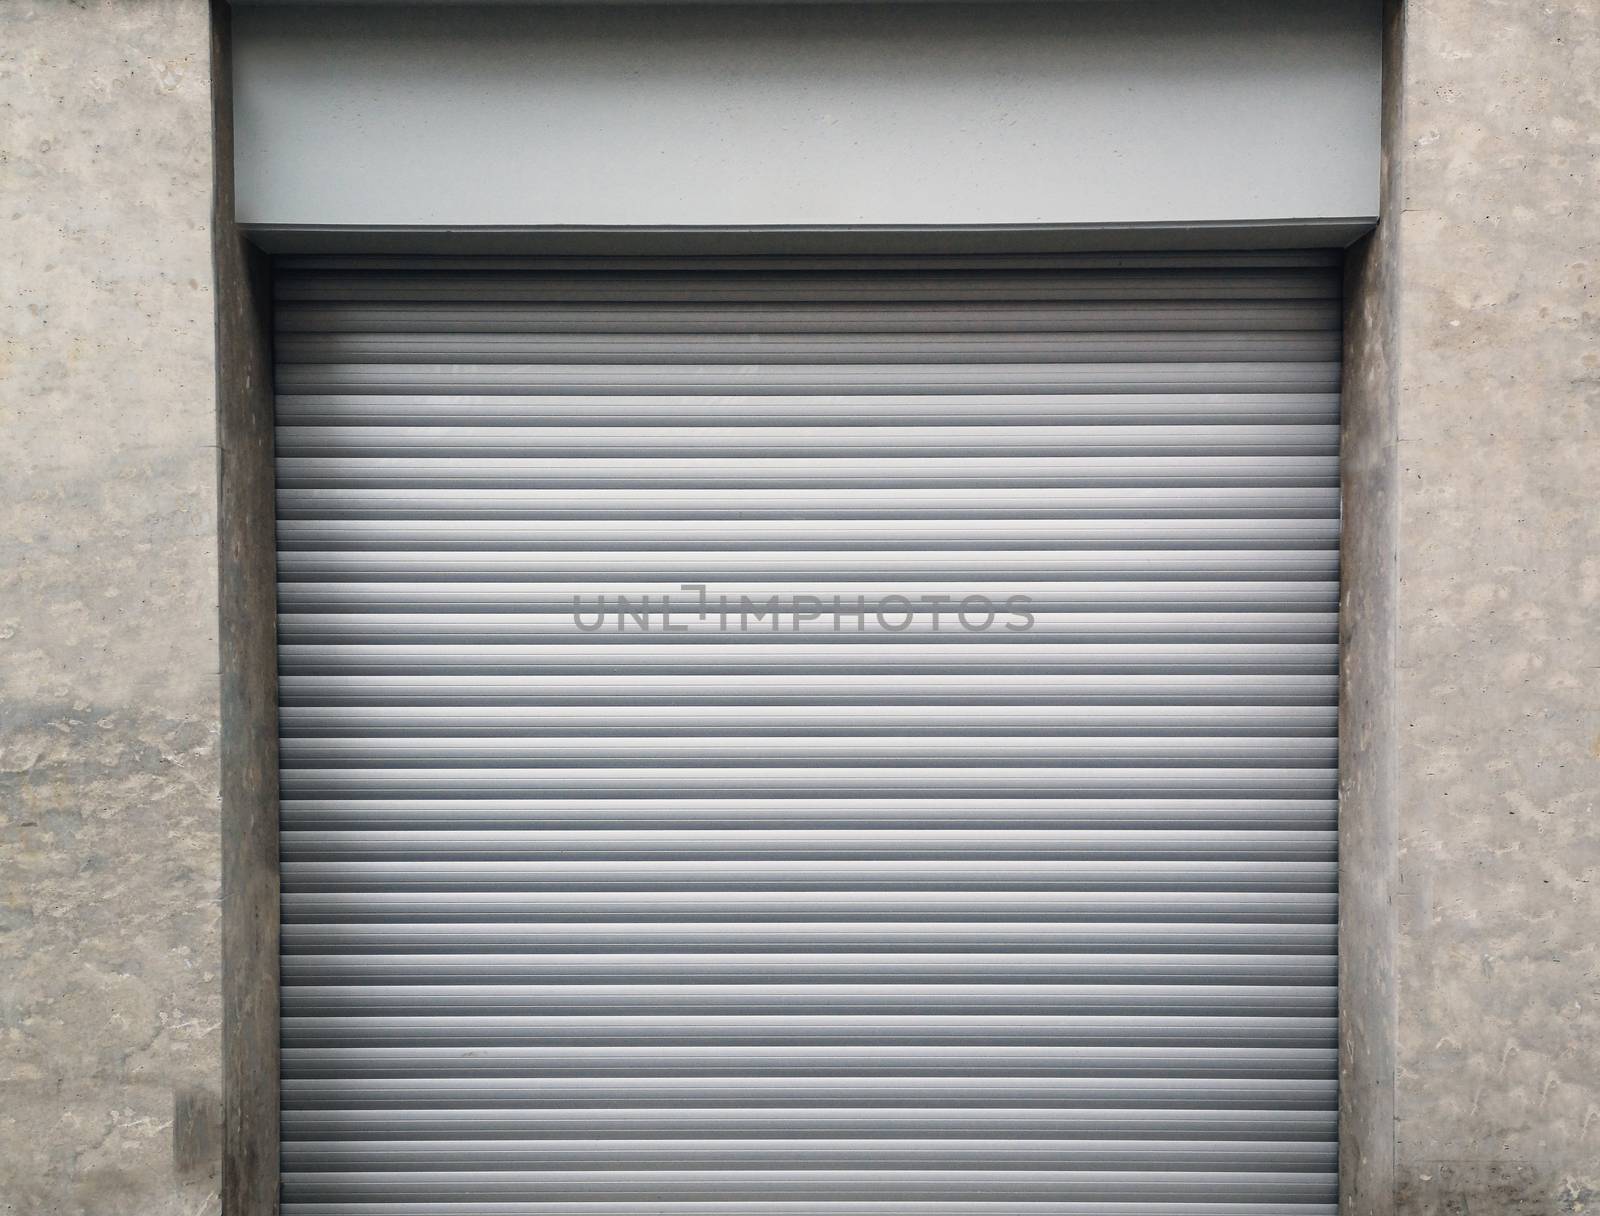 The garage's metal roller shutters are closed .Texture or background